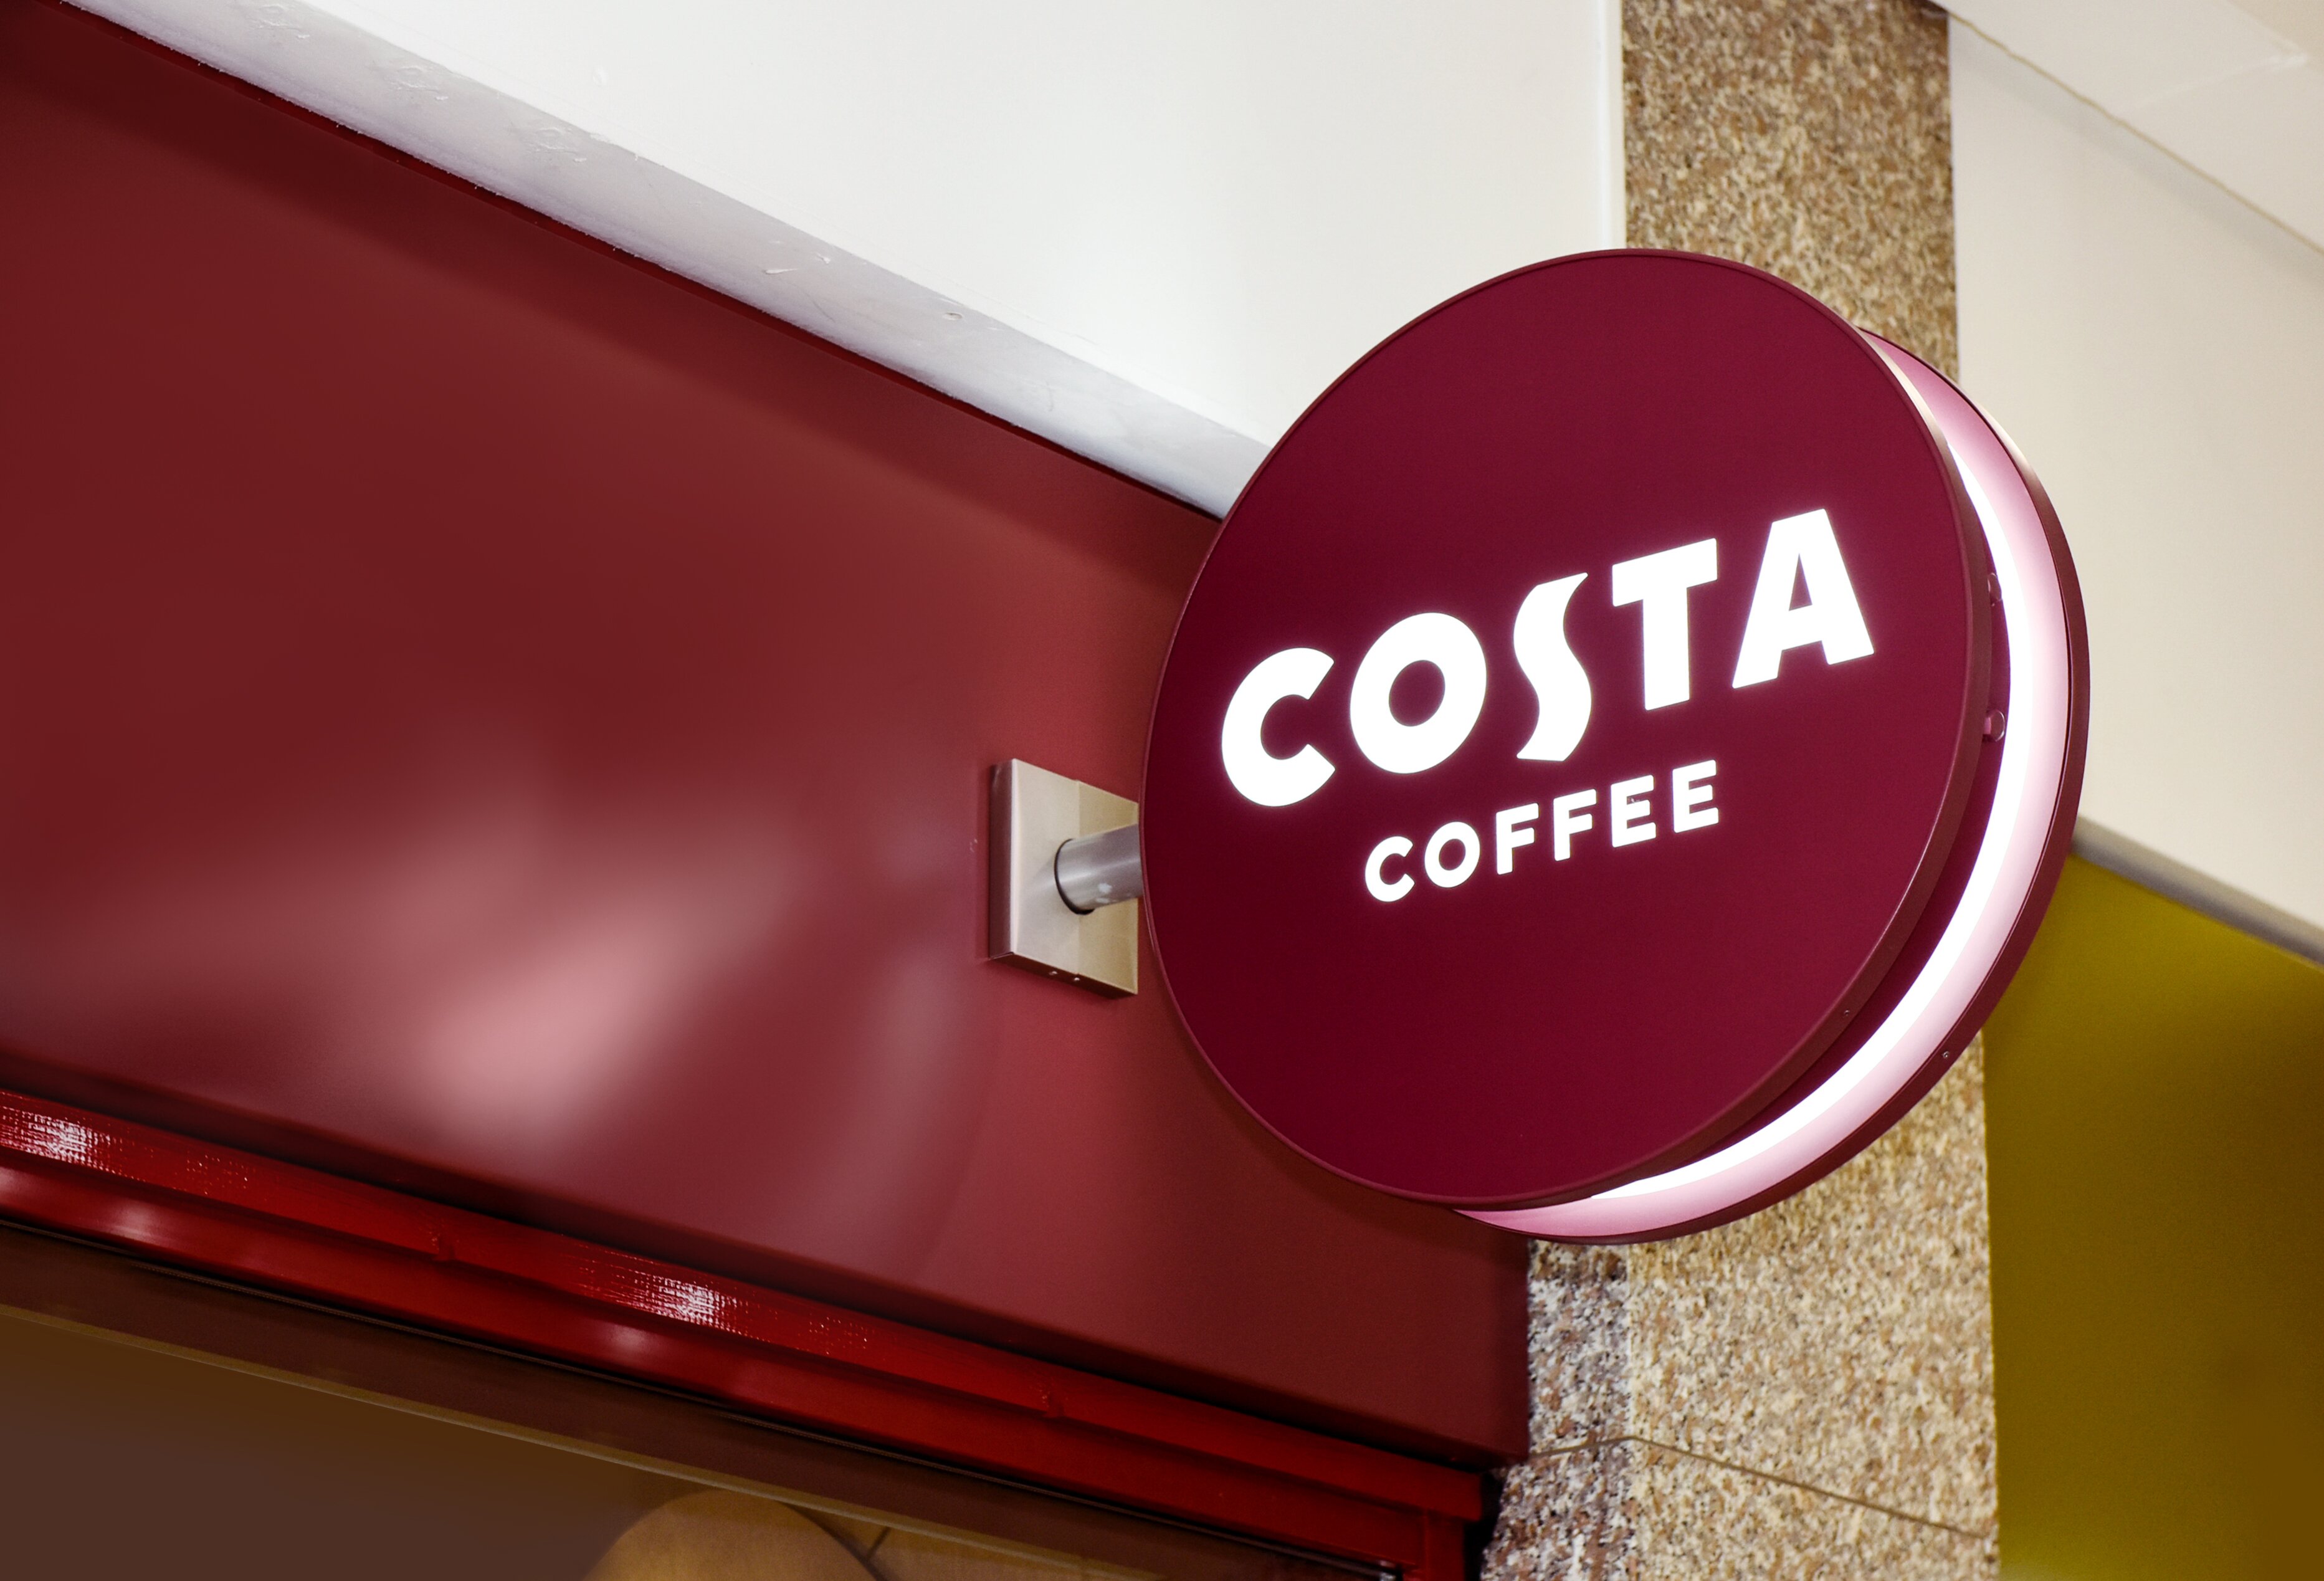 Philippe Schaillee named chief executive of Costa Coffee 